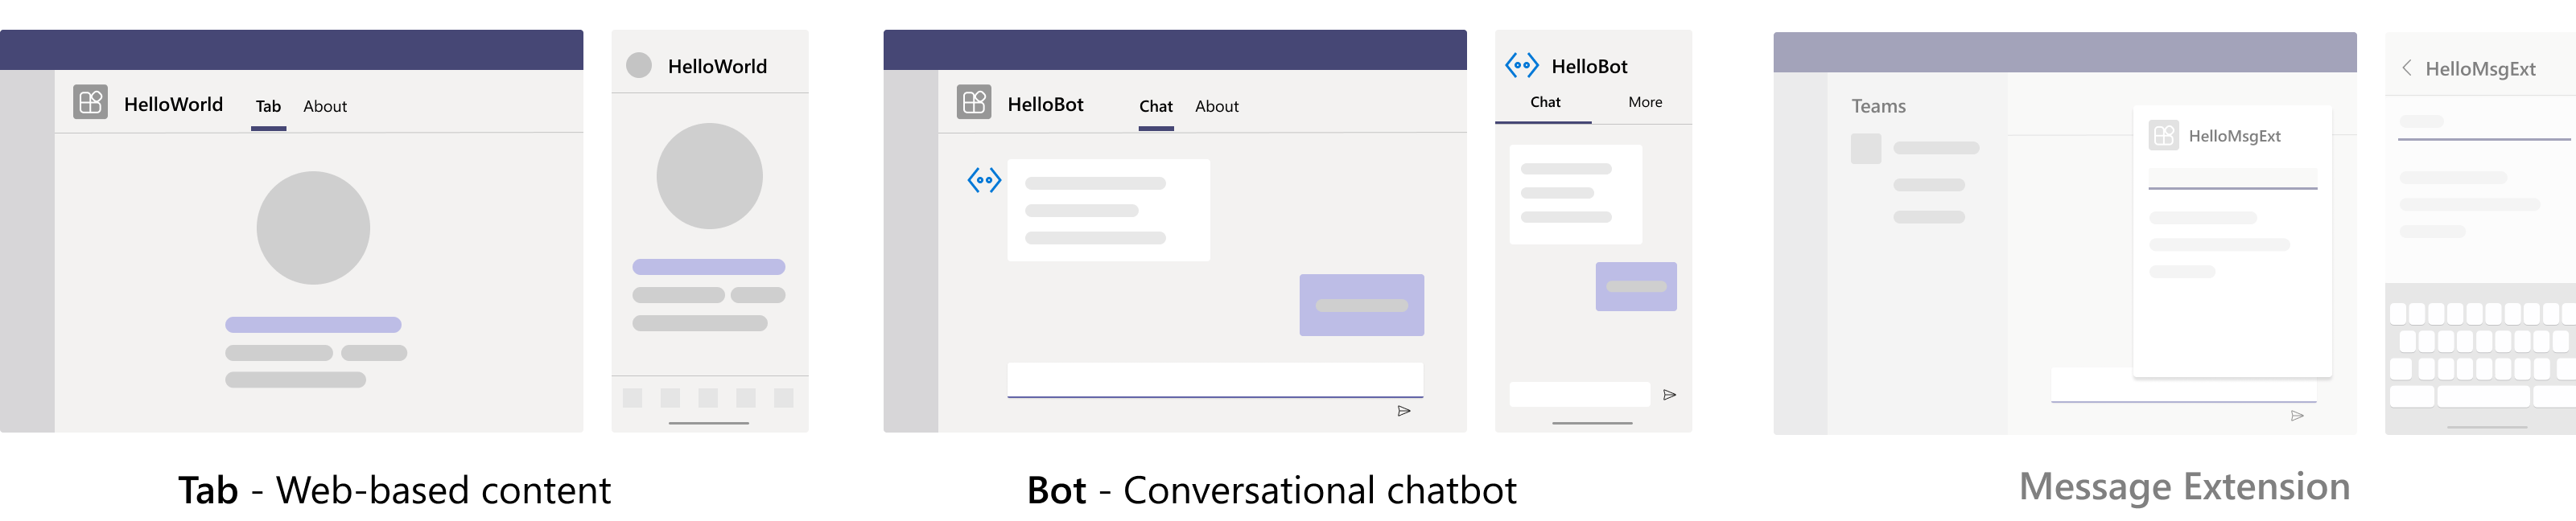 Screenshot of the blazor app displaying the tab, Bot, and Message Extension output after you've successfully completed the step-by-step guide.